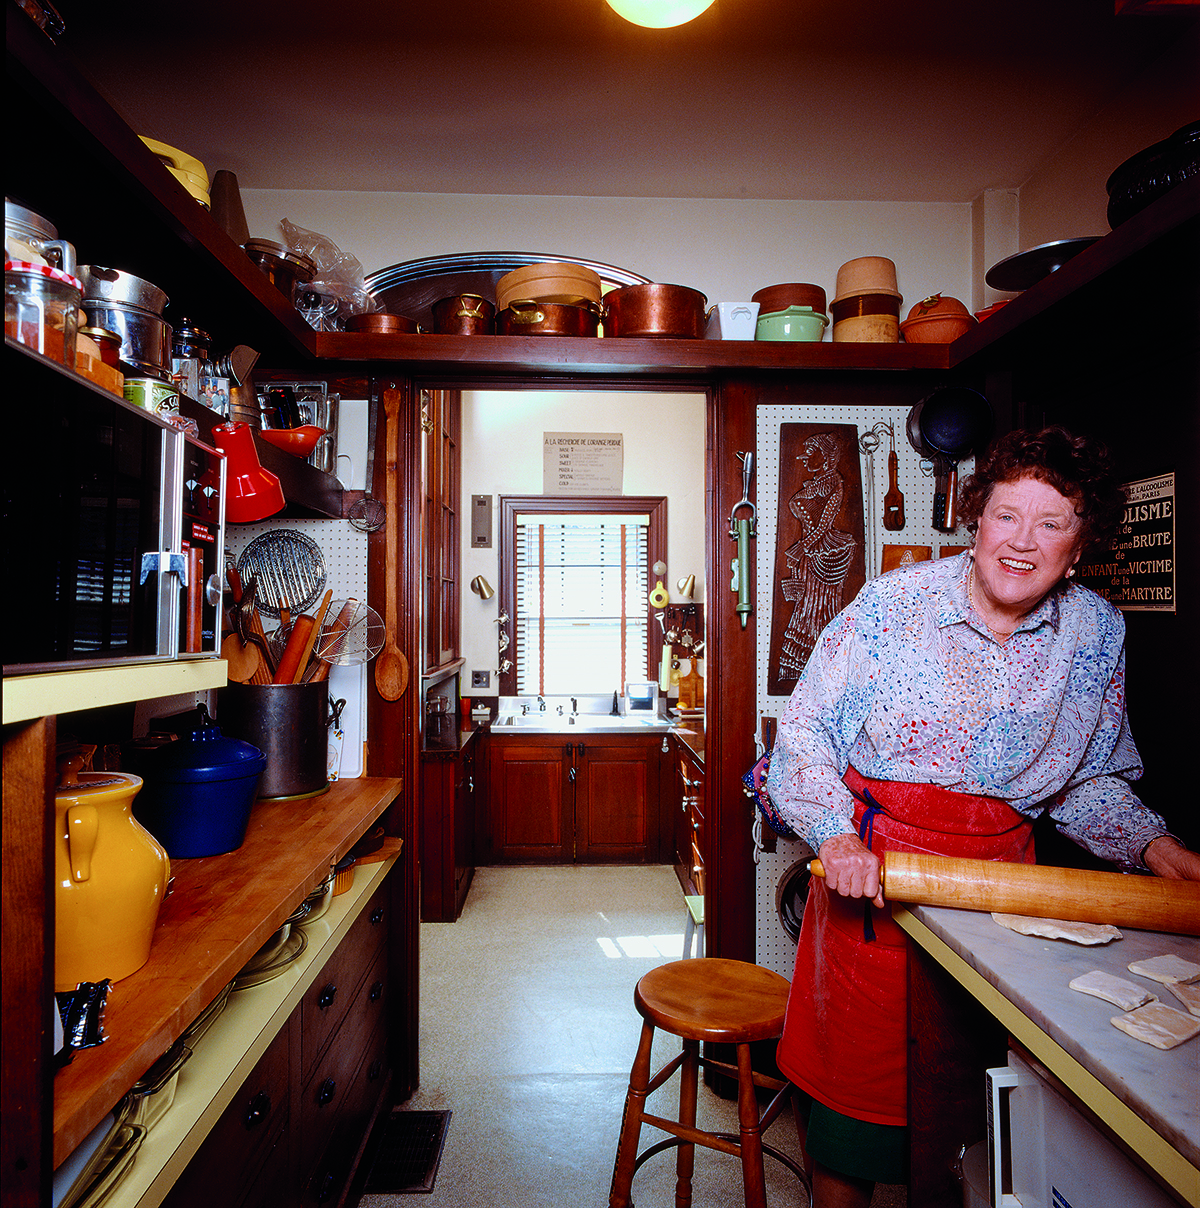 Julia Child rolling pastry in one of her Cambridge pantries. / Image from In Julia's Kitchen: Practical and Convivial Kitchen Design Inspired by Julia Child, by Pamela Heyne and Jim Scherer published by ForeEdge, an imprint of University Press of New England.